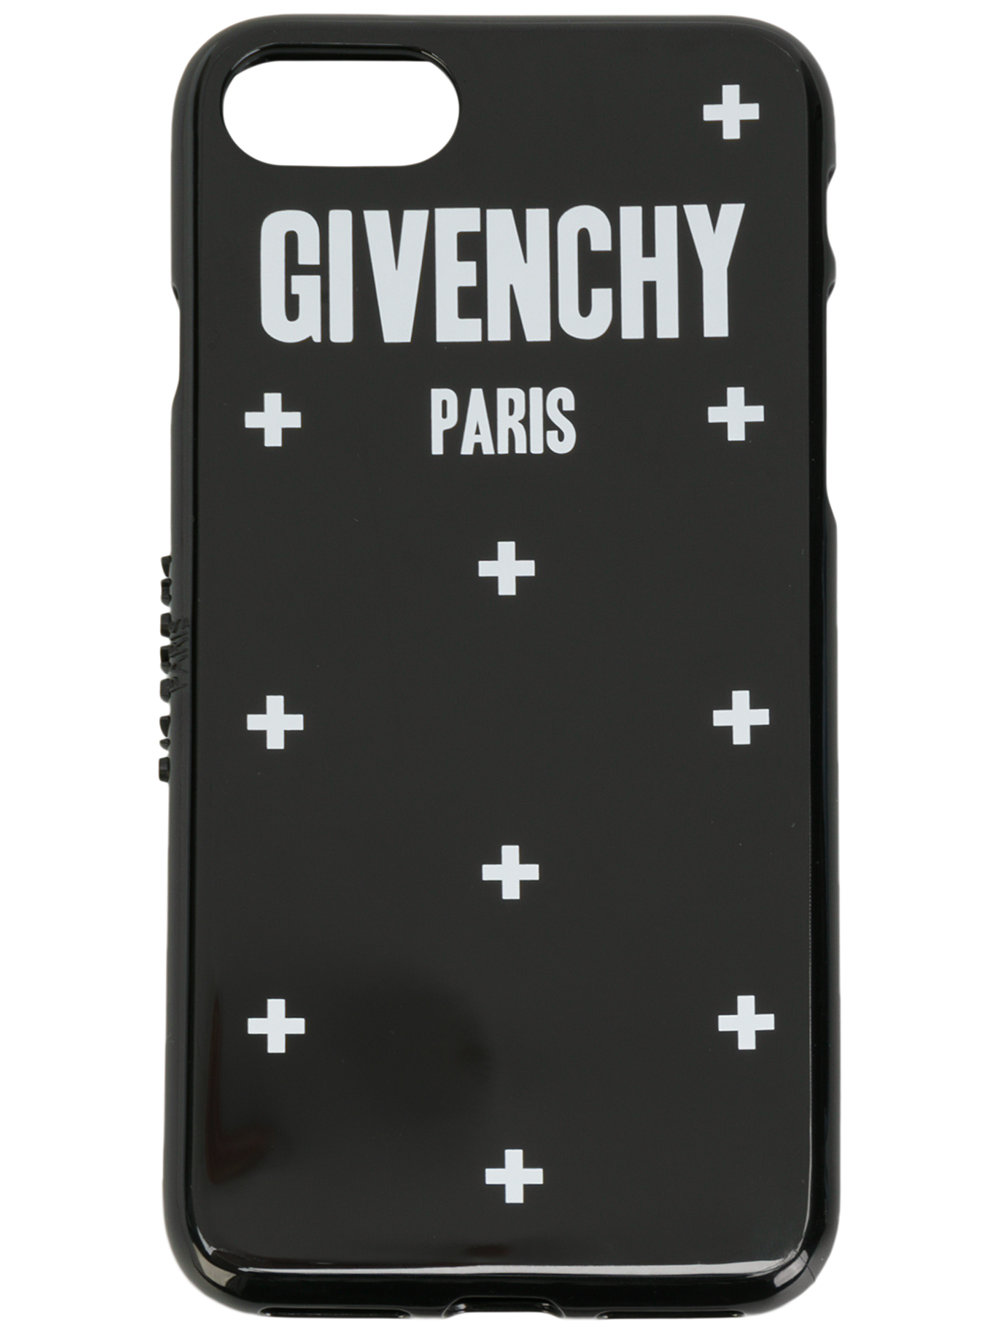 The Best Givenchy Items Under $300 